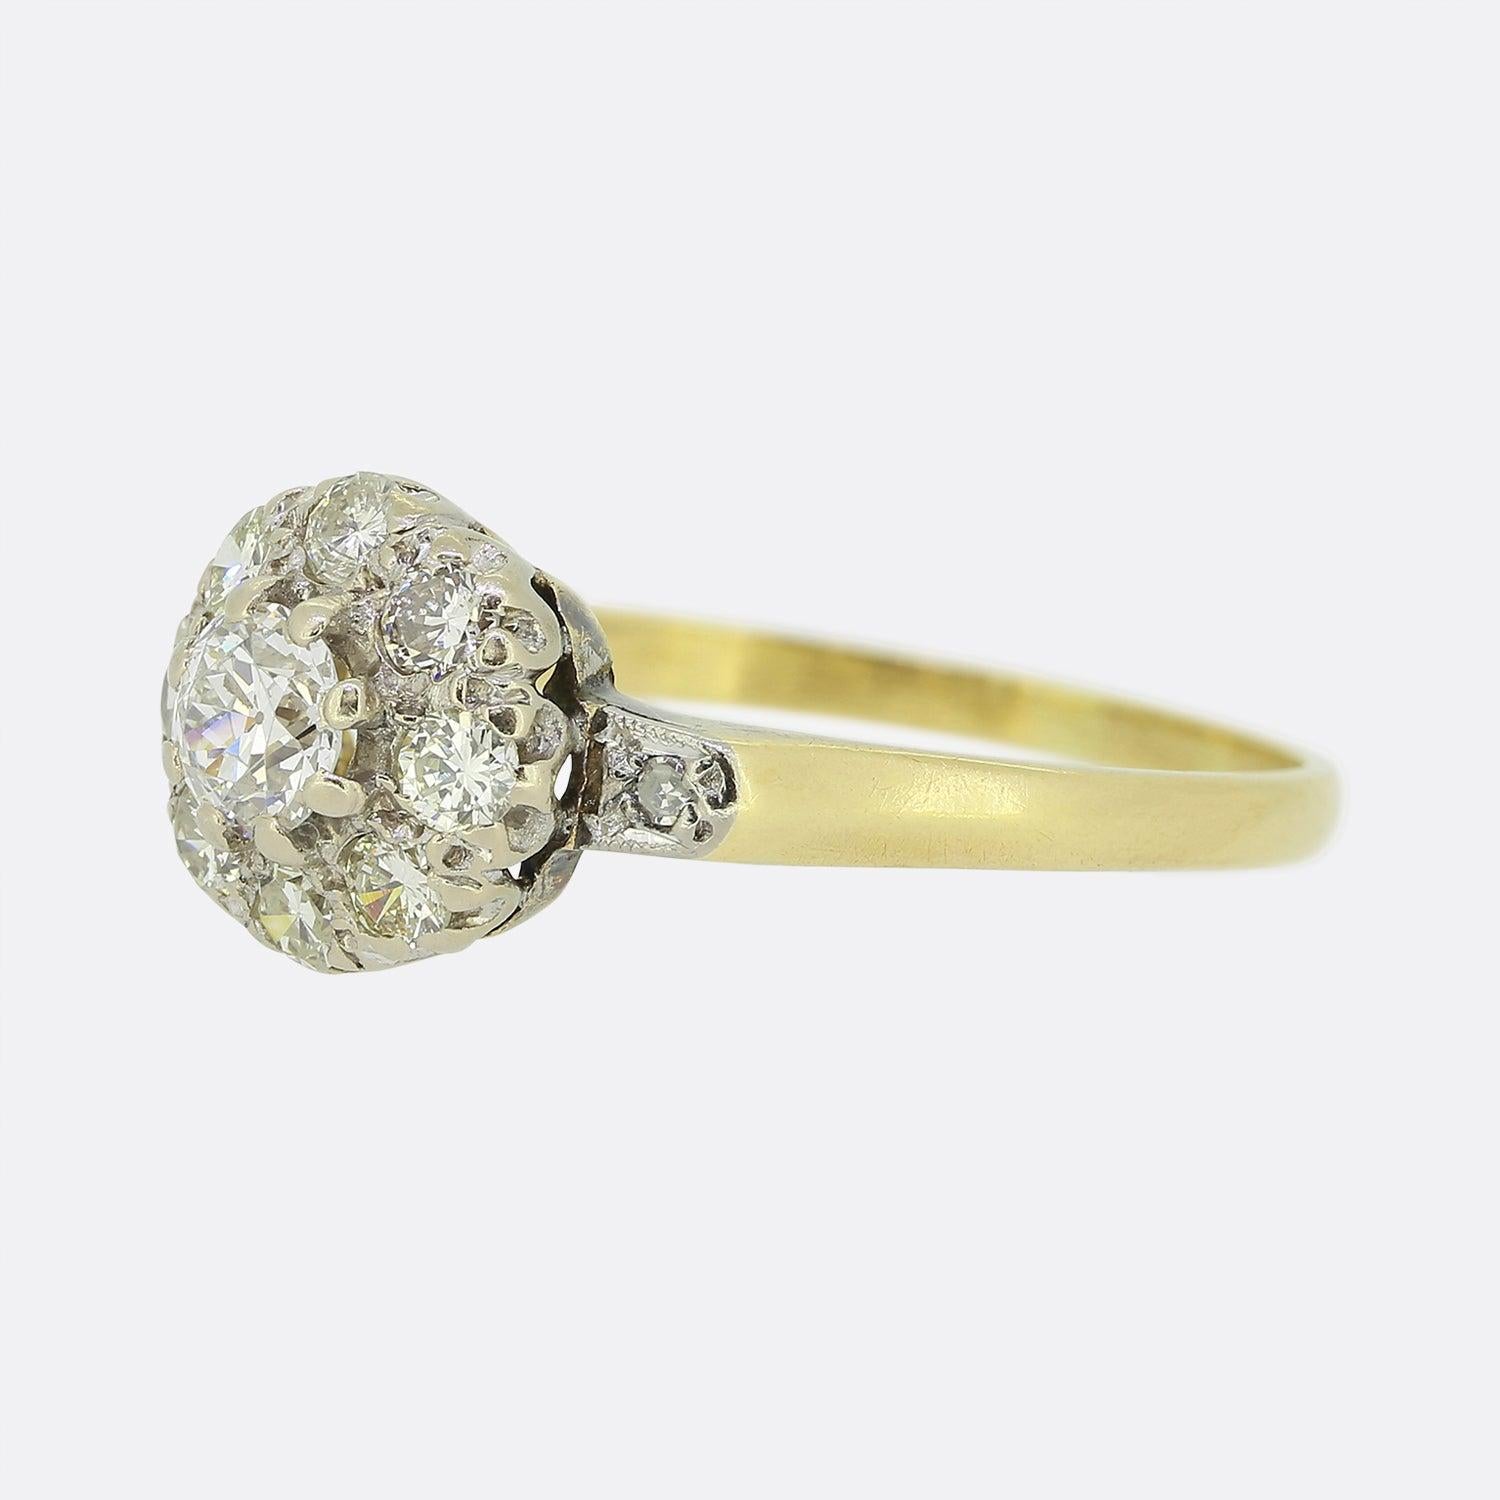 Here we have a classic diamond cluster ring. A single round faceted old European cut diamond sits slightly risen at the centre of the face and is framed by a circulating array of brilliant cut diamonds. All stones here are set in platinum with a